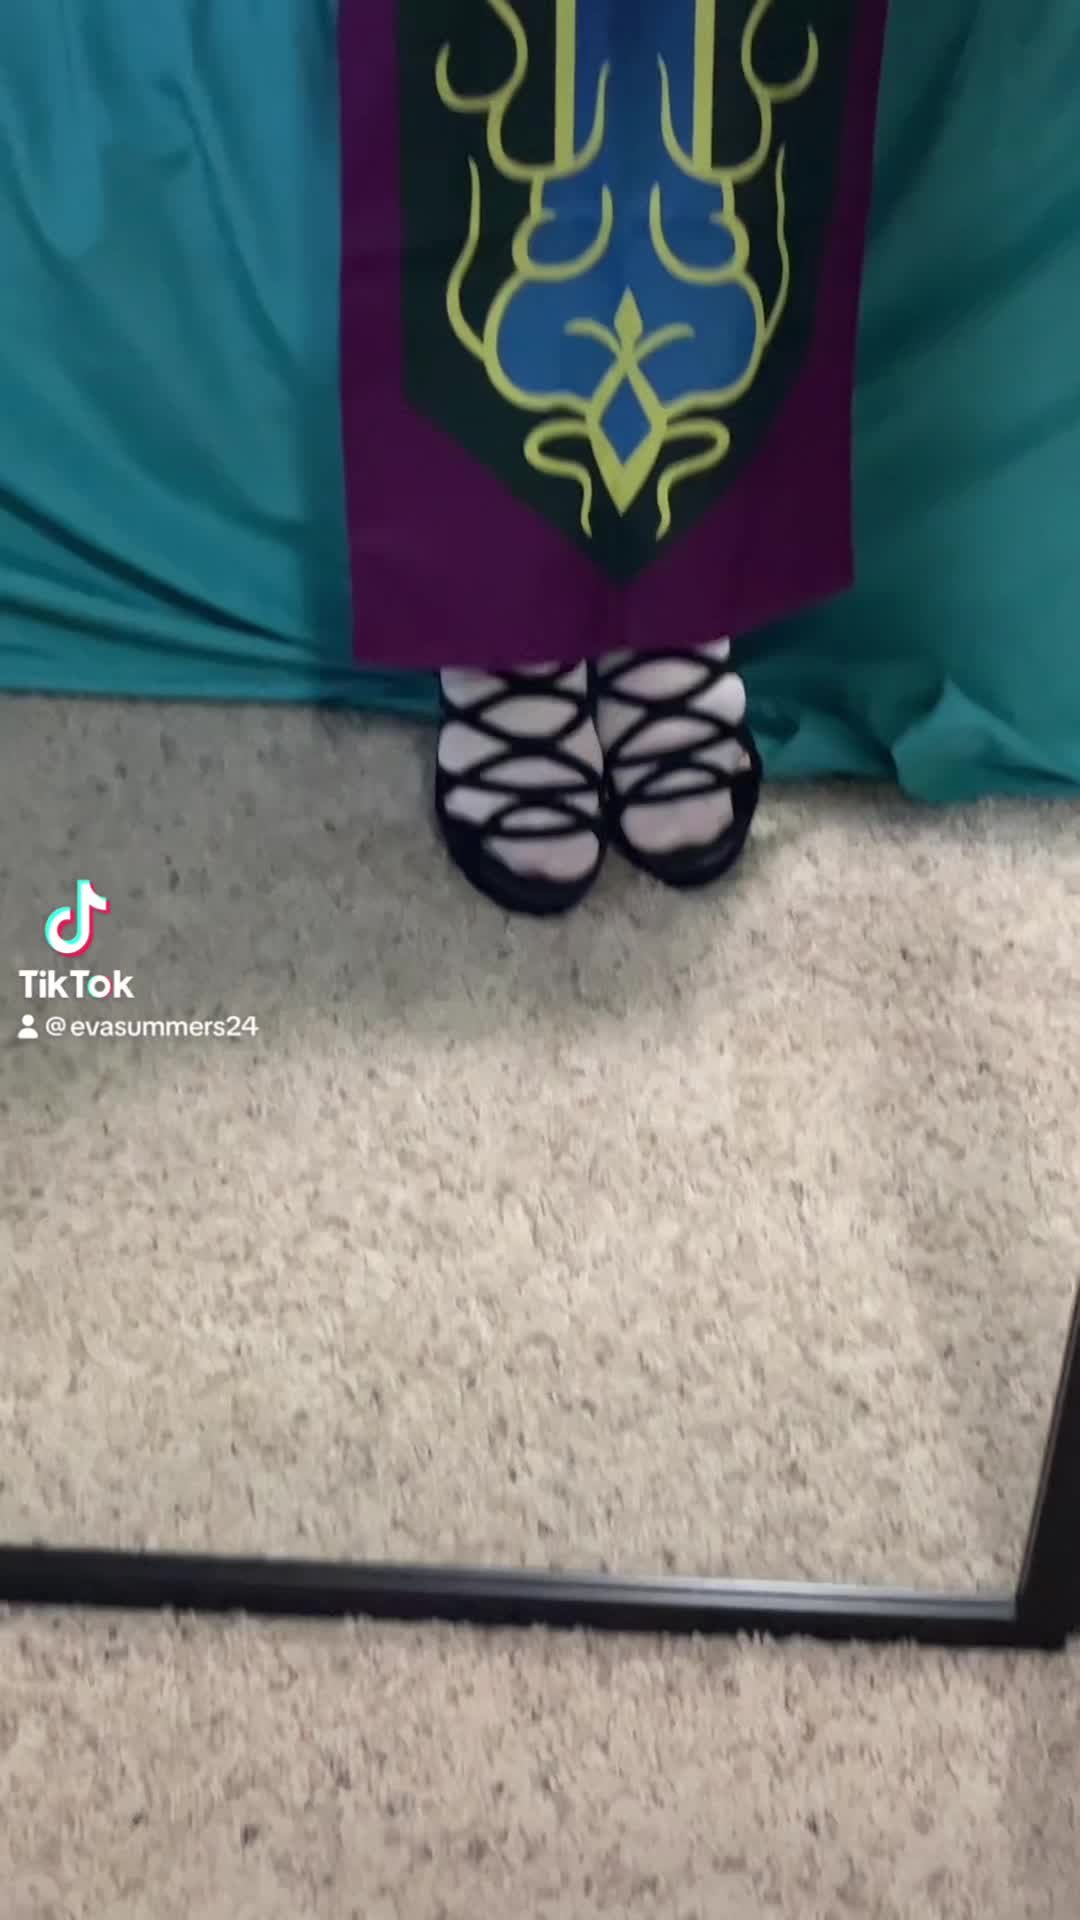 Watch the Video by Evasummers with the username @Evasummers, who is a star user, posted on March 8, 2024. The post is about the topic NSFW TikTok. and the text says '#girls #fyp #usa #blonde #thighhighs #petite #cosplay #princesszelda #zelda #highheels #cosplaygirls #princesszeldacosplay #zeldacosplay #cosplayers #meme #adultcontent #adulthumor #contentcreator #foryou #onlyfans #onlyfansgirls #foryou #midriff #belly..'